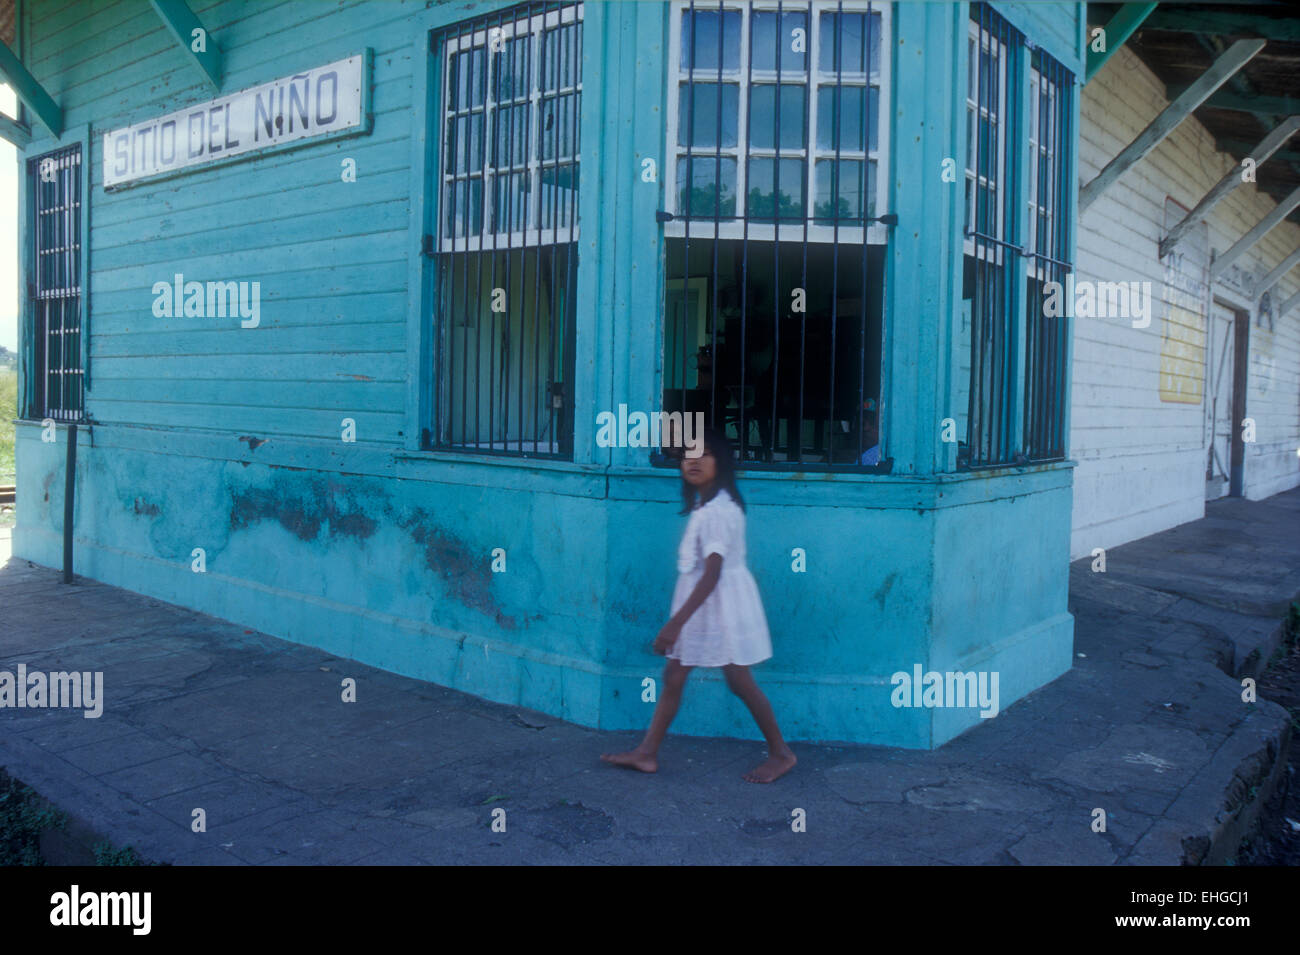 Barefoot girl striding past the Sitio del Niño train station in rural El  Salvador, Central America Stock Photo - Alamy